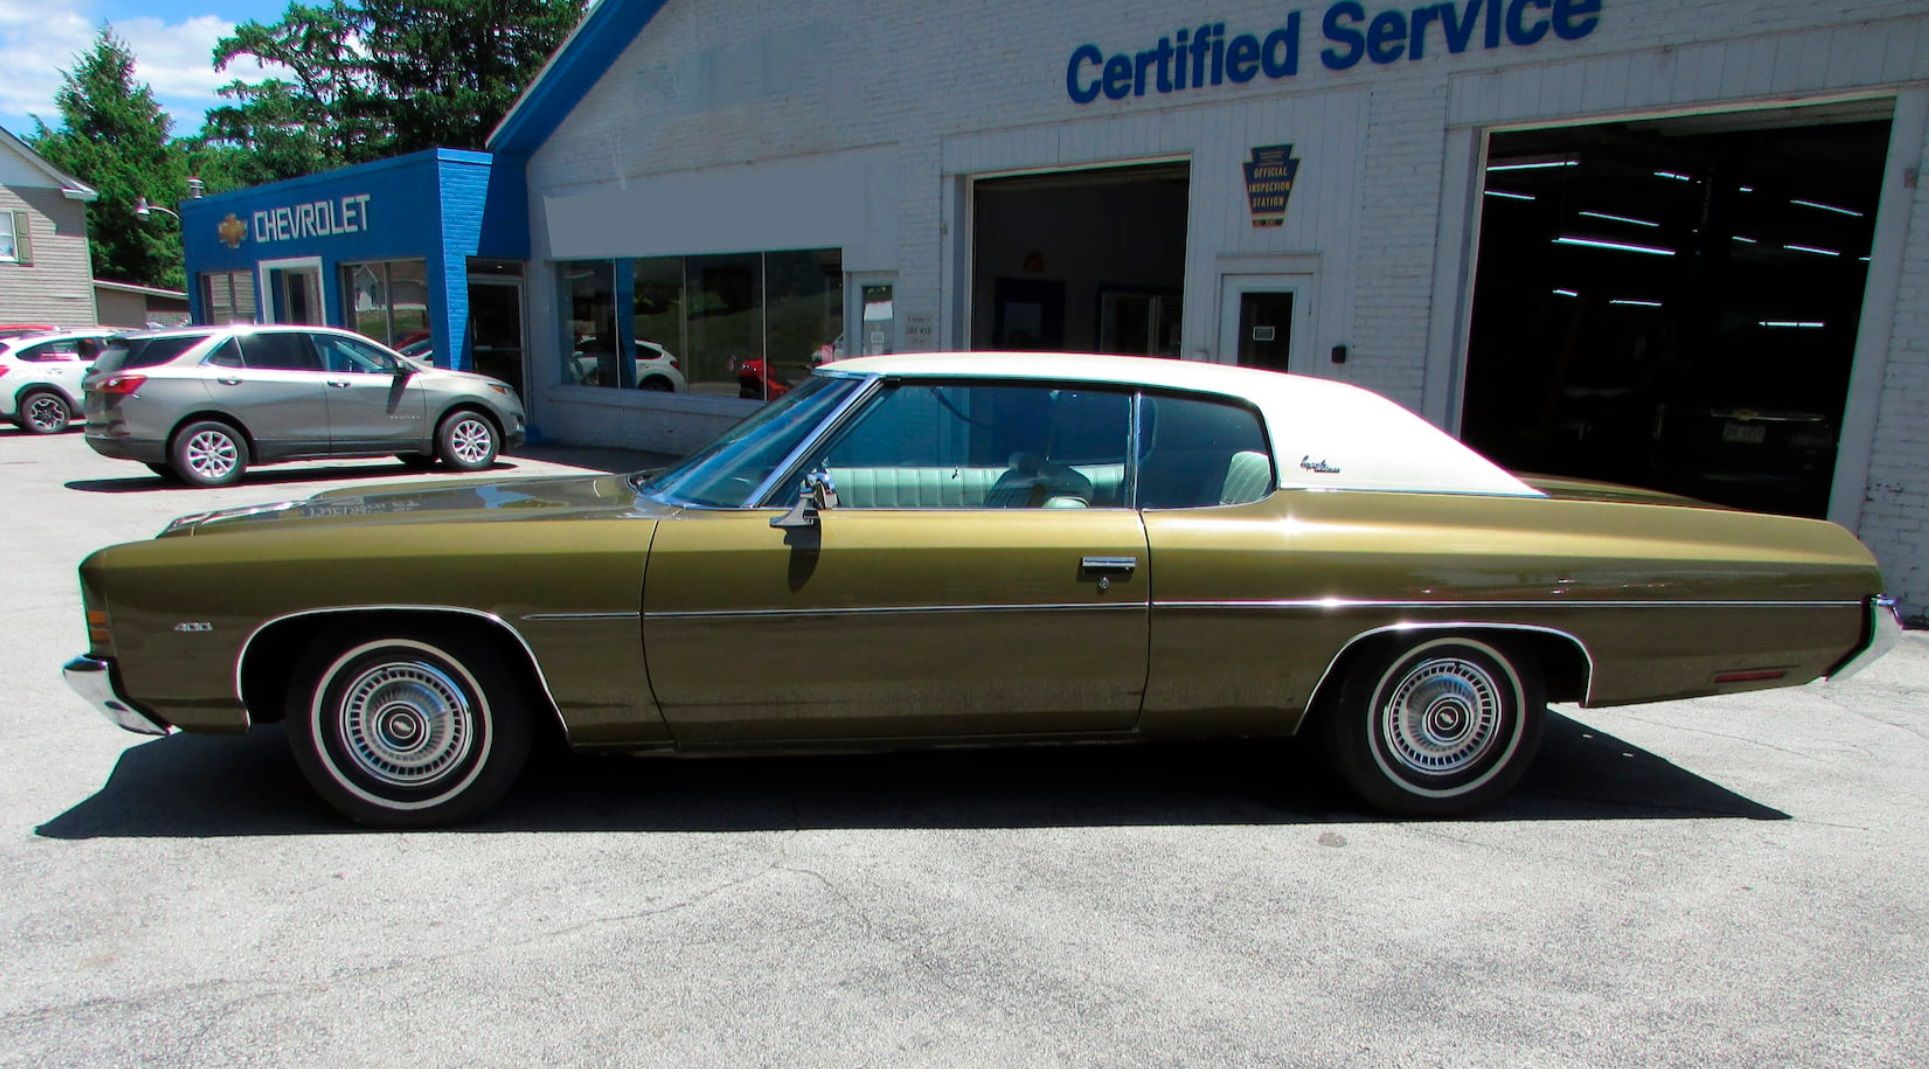 A side view of the 1972 Chevrolet Impala. 